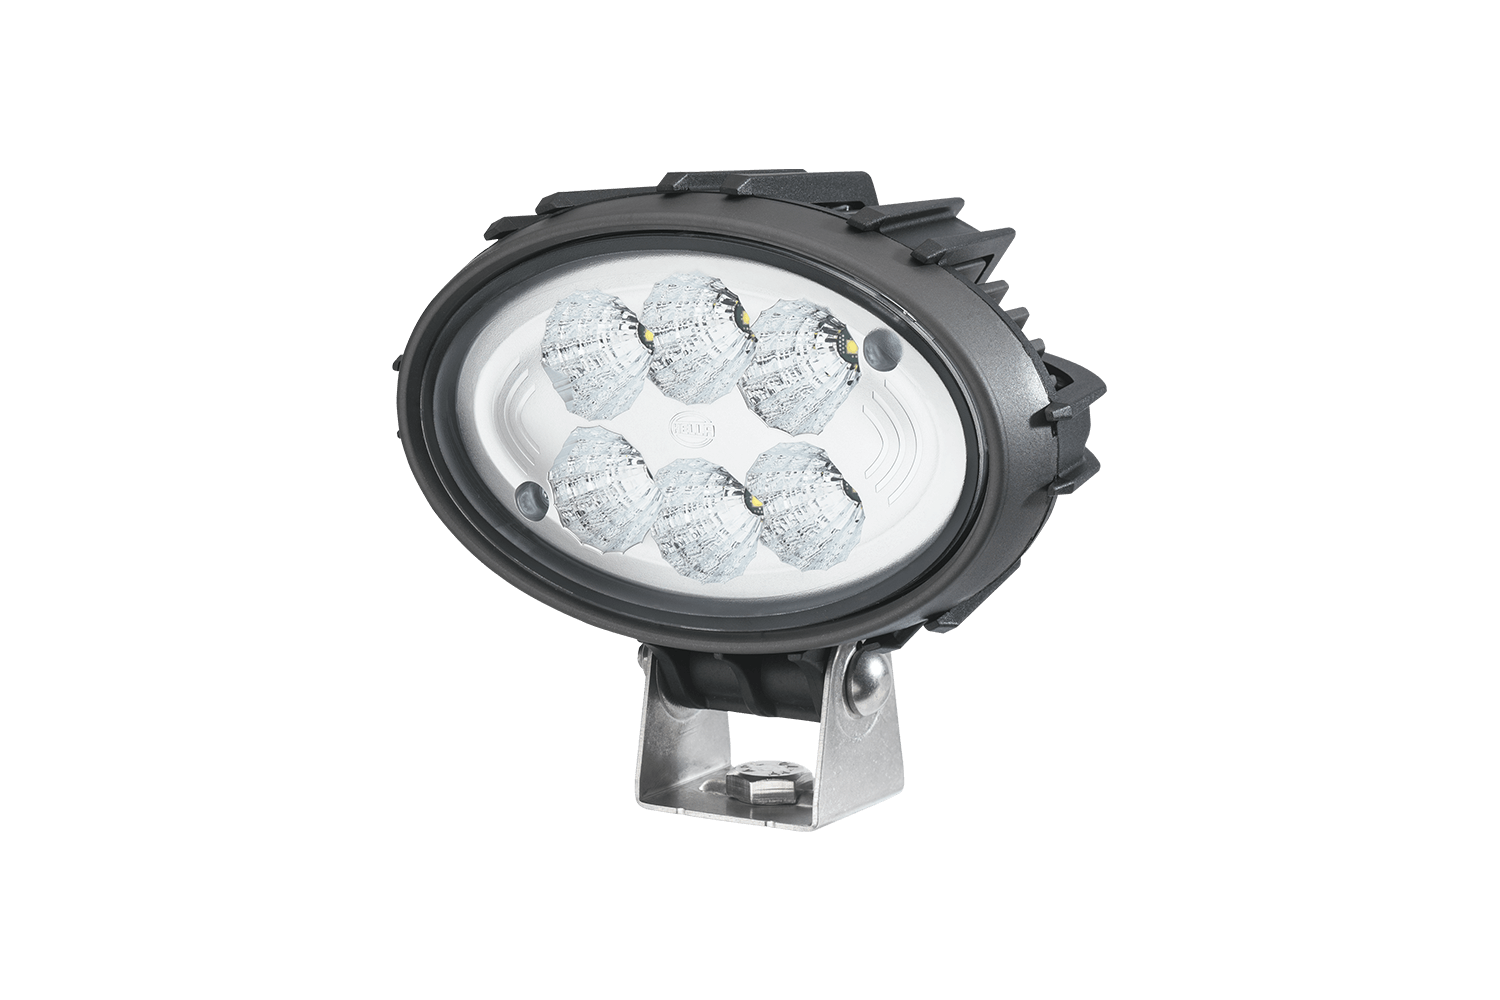 Oval 100 LED compact work lamps from Hella offered by Patlon